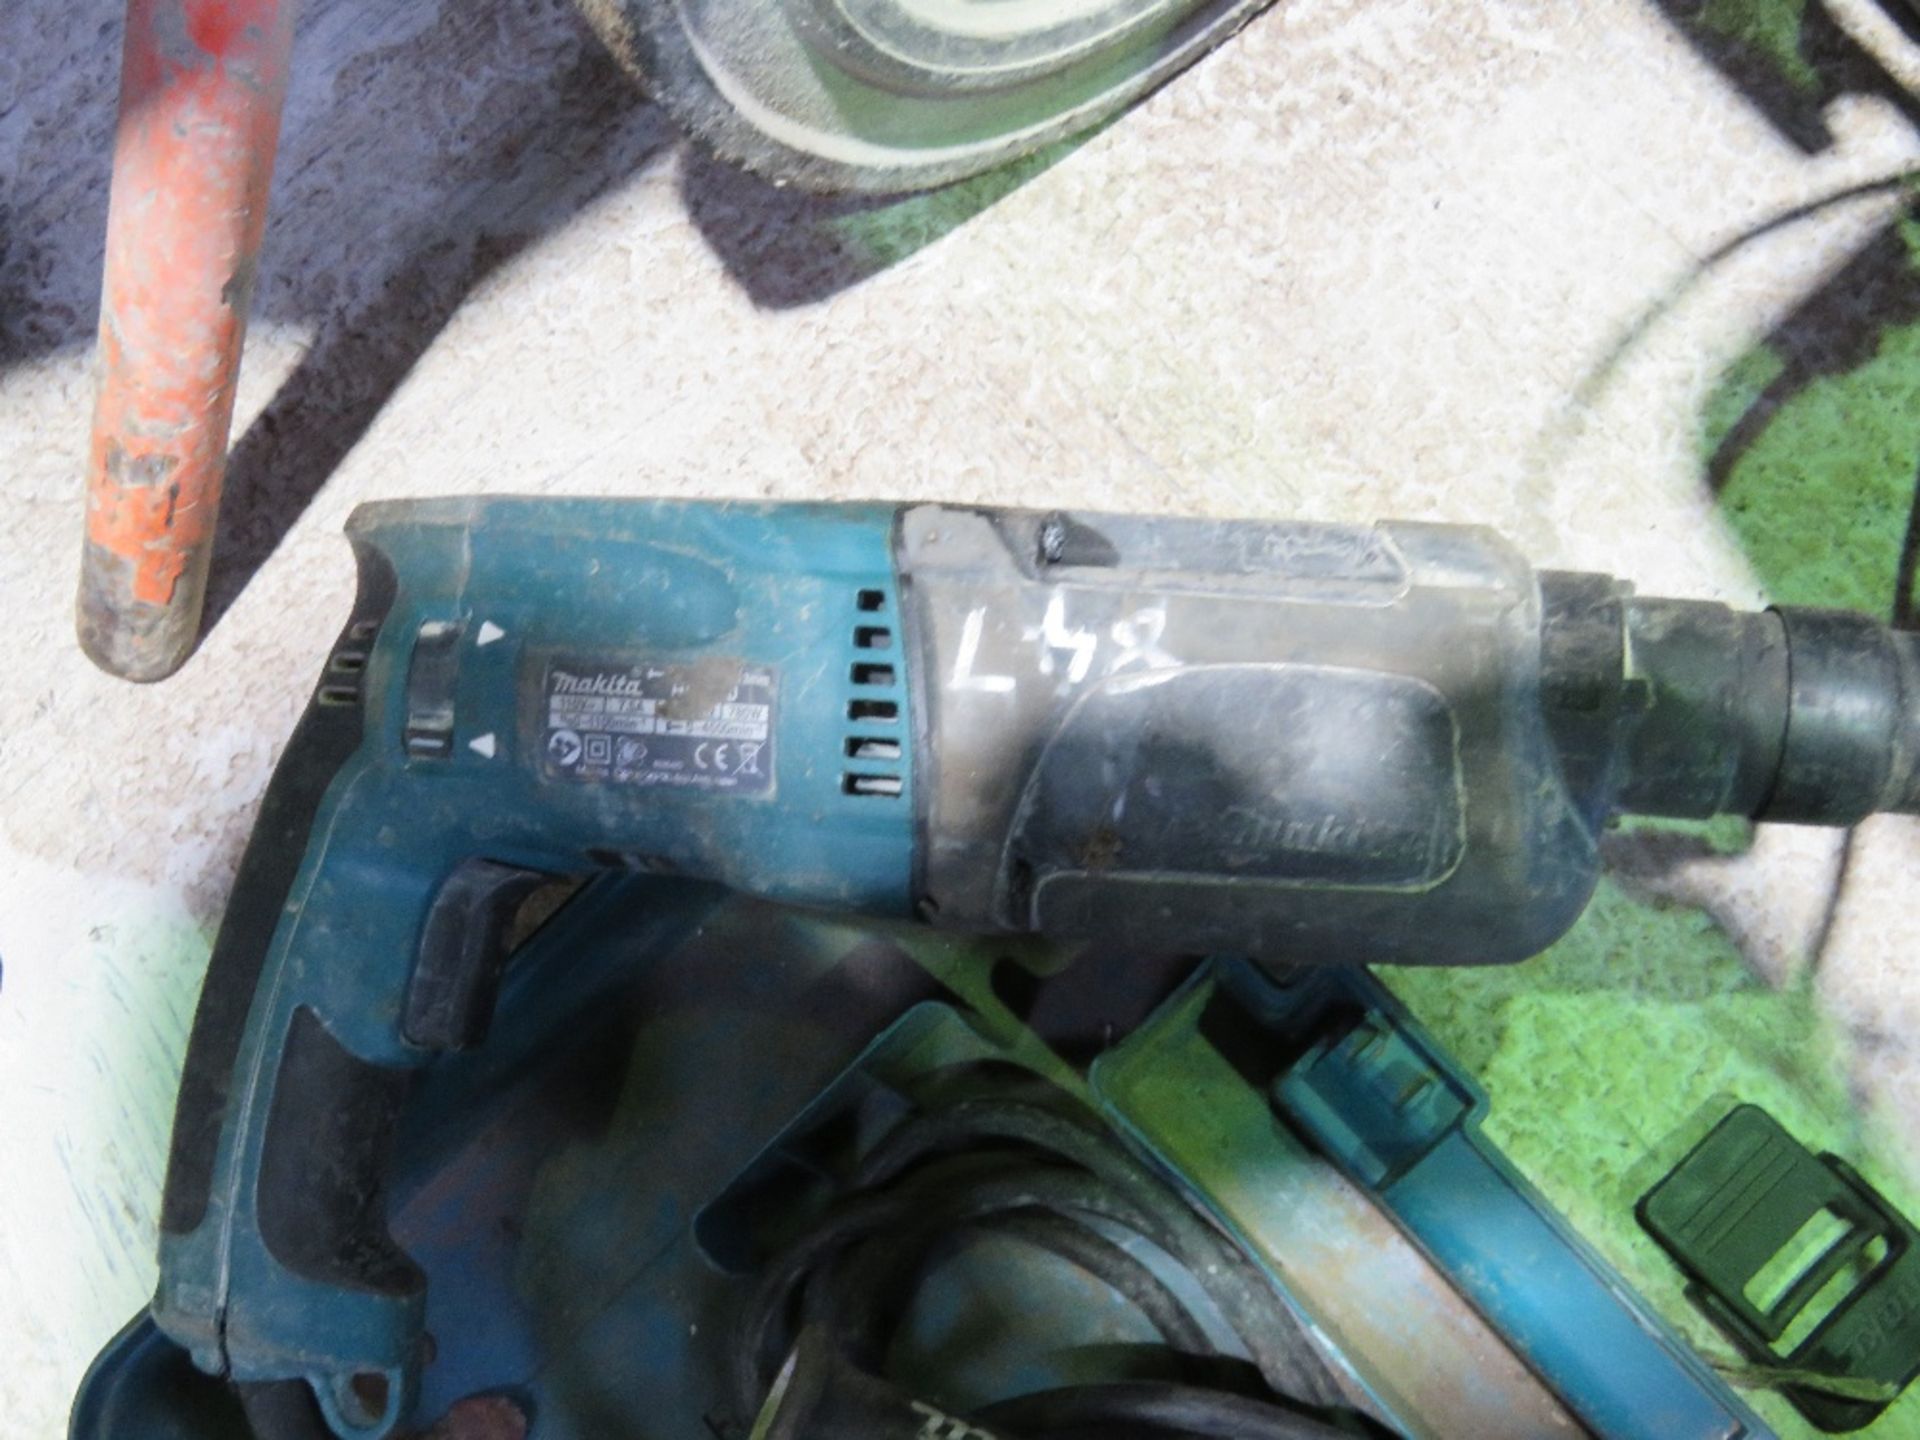 3 X MAKITA POWER TOOLS: 2 NO DRILLS PLUS A JIGSAW.. THIS LOT IS SOLD UNDER THE AUCTIONEERS MARGIN - Image 5 of 5